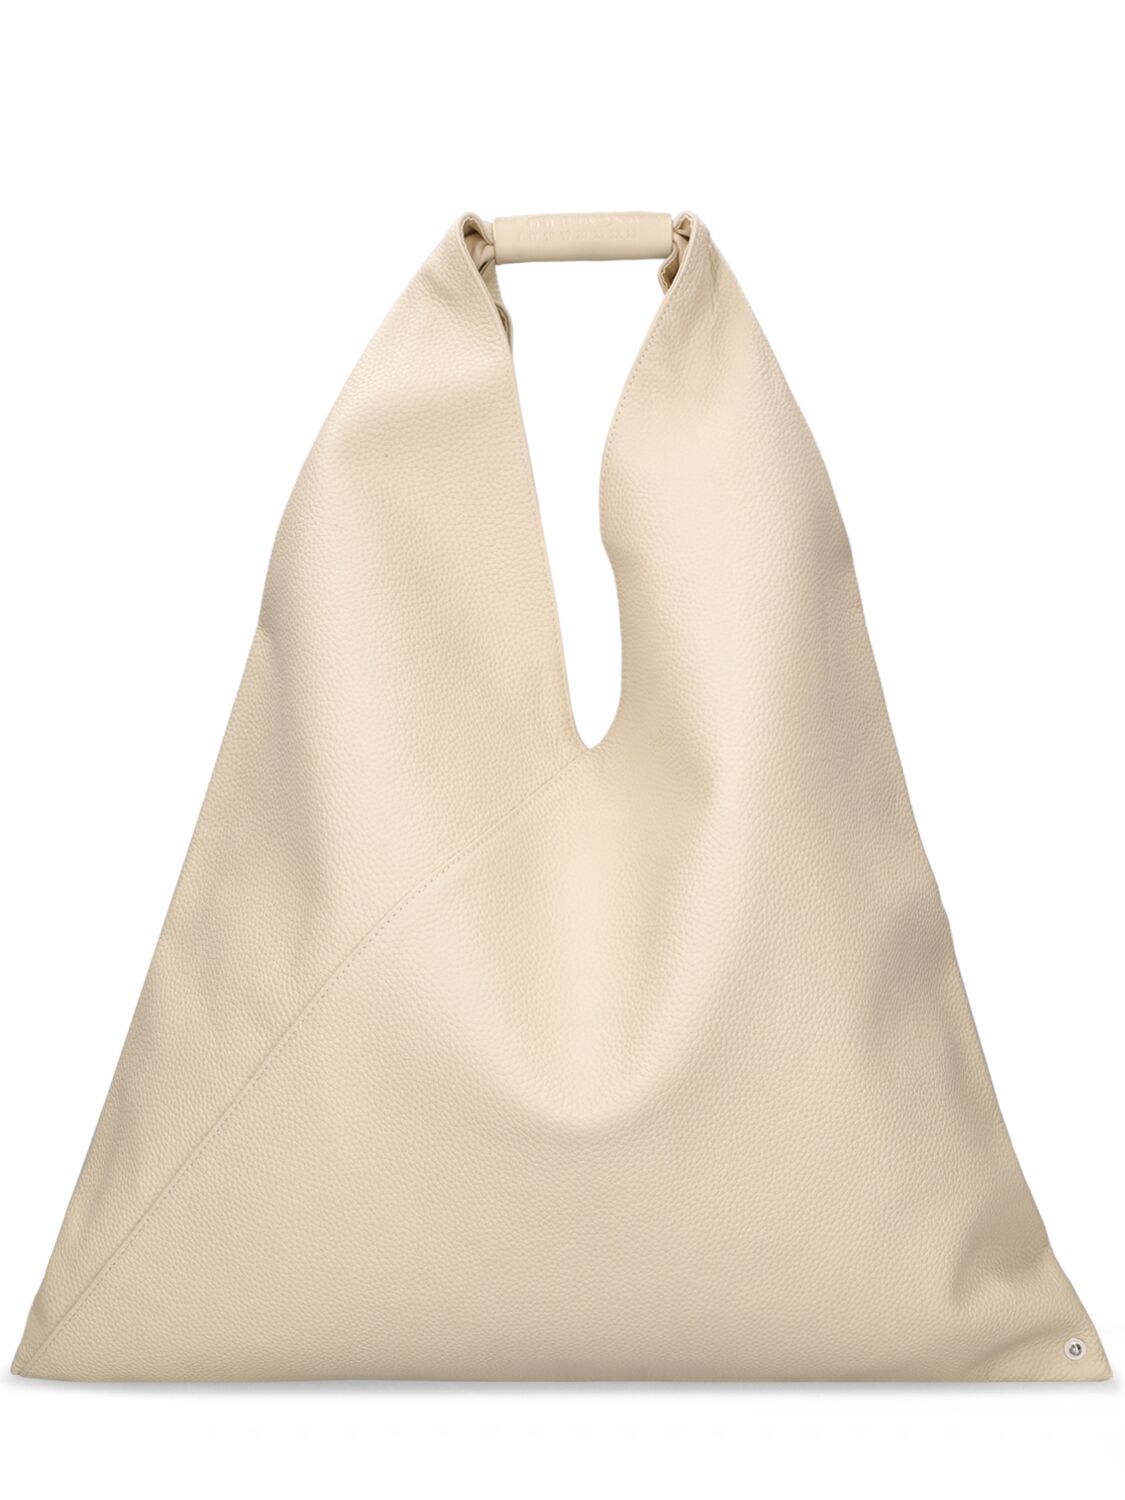 Mm6 Maison Margiela Classic Japanese Grained Leather Bag In Zenzero